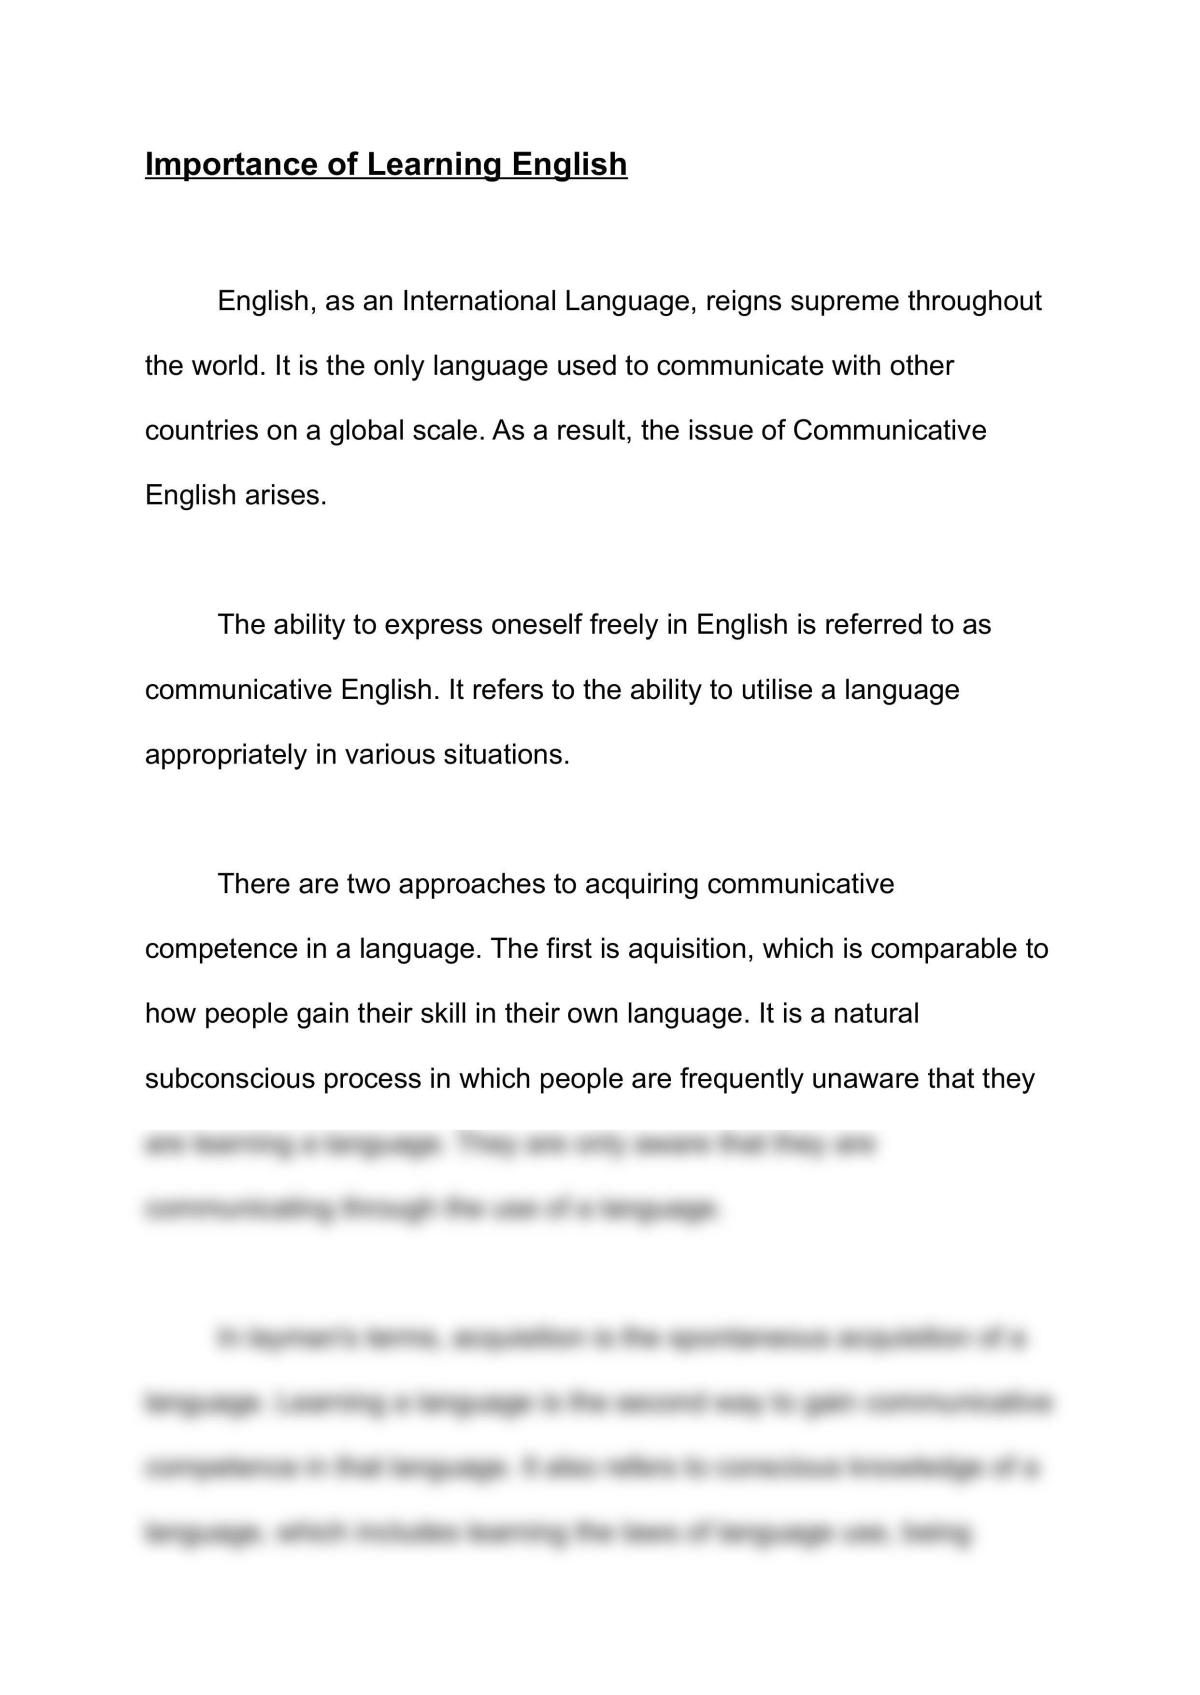 essay about learning new language